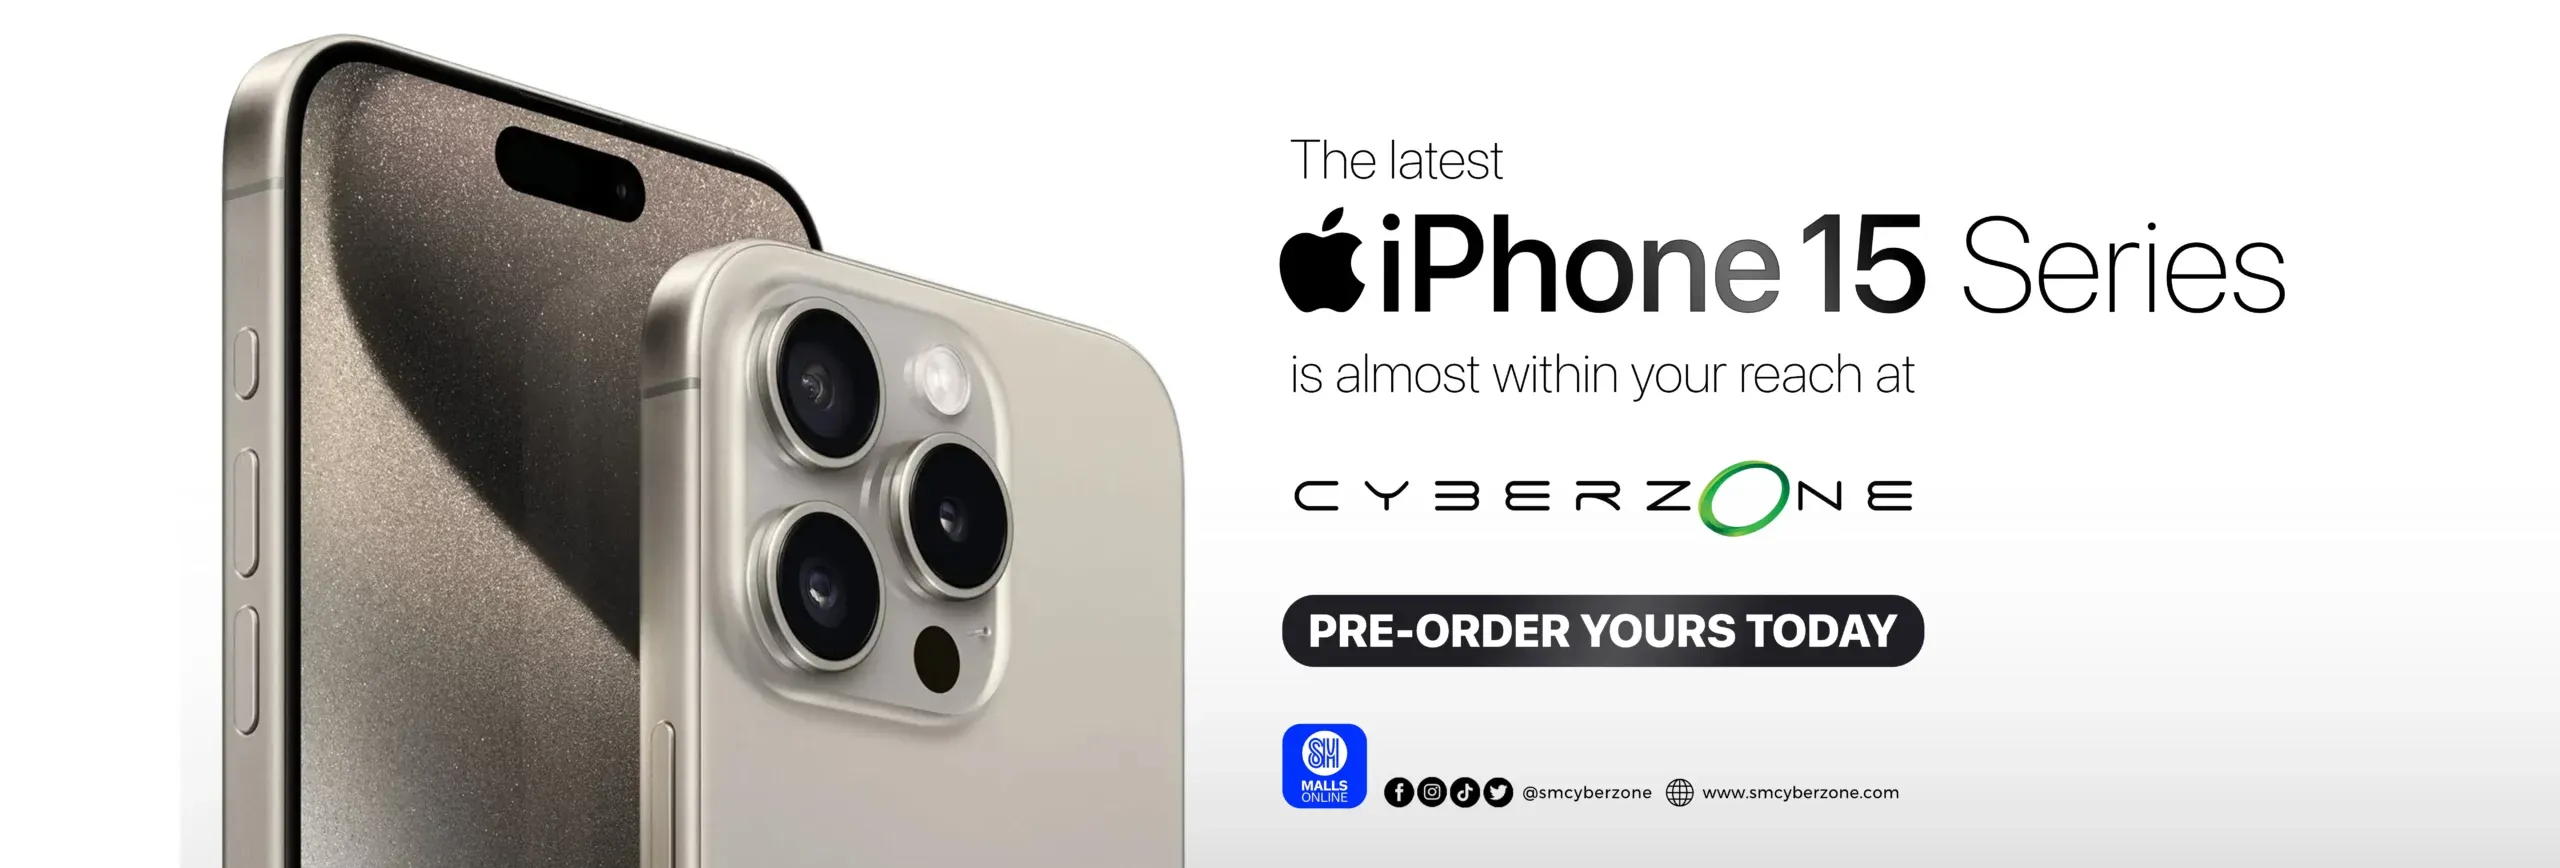 the-latest-iphone-15-series-is-almost-within-your-reach-at-cyberzone